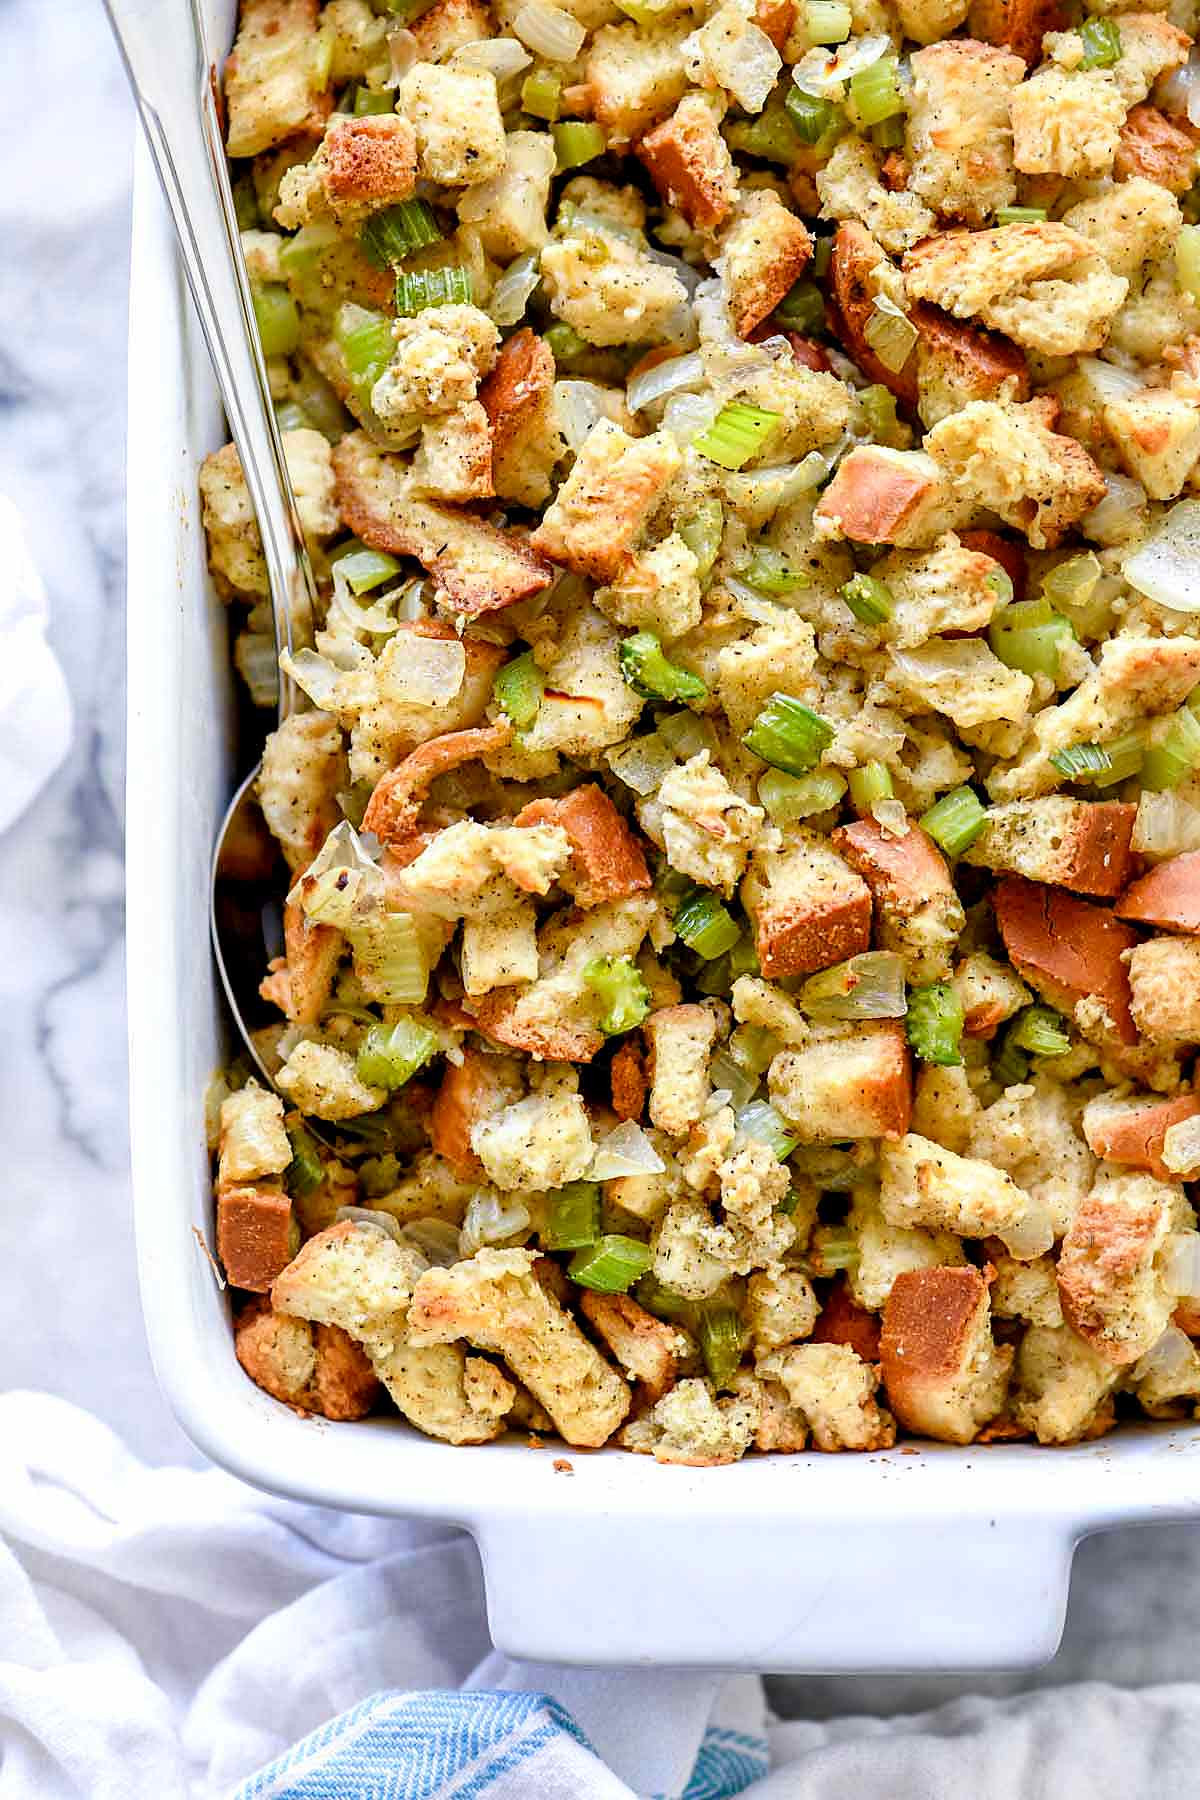 Homemade Thanksgiving Stuffing Recipe
 The BEST Stuffing Recipe Traditional Stuffing